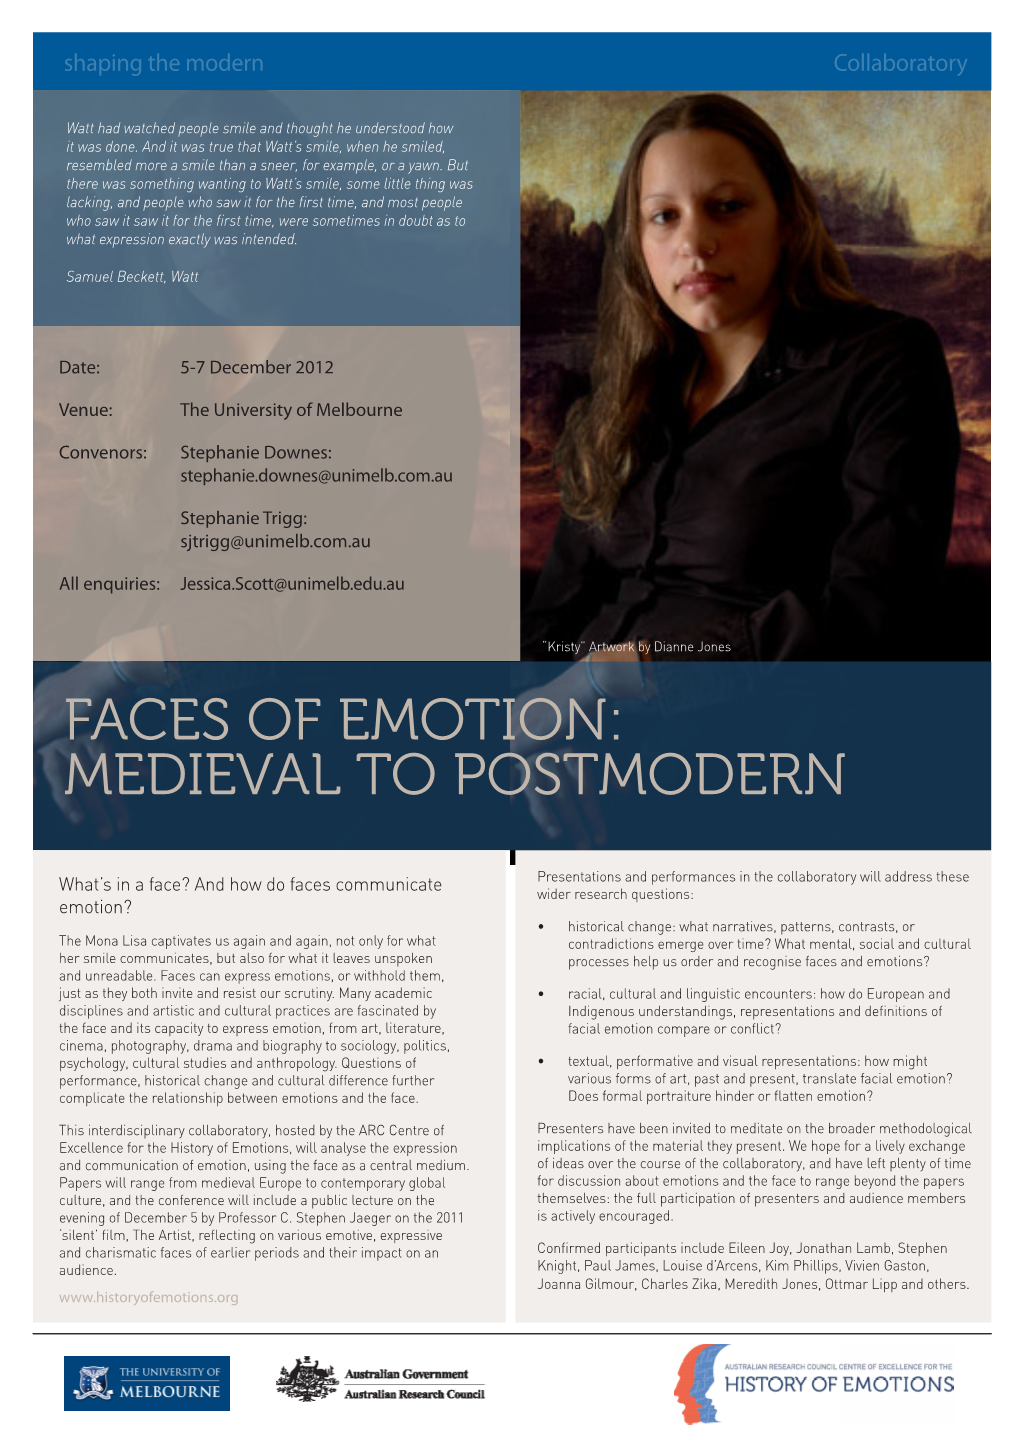 Faces of Emotion: Medieval to Postmodern